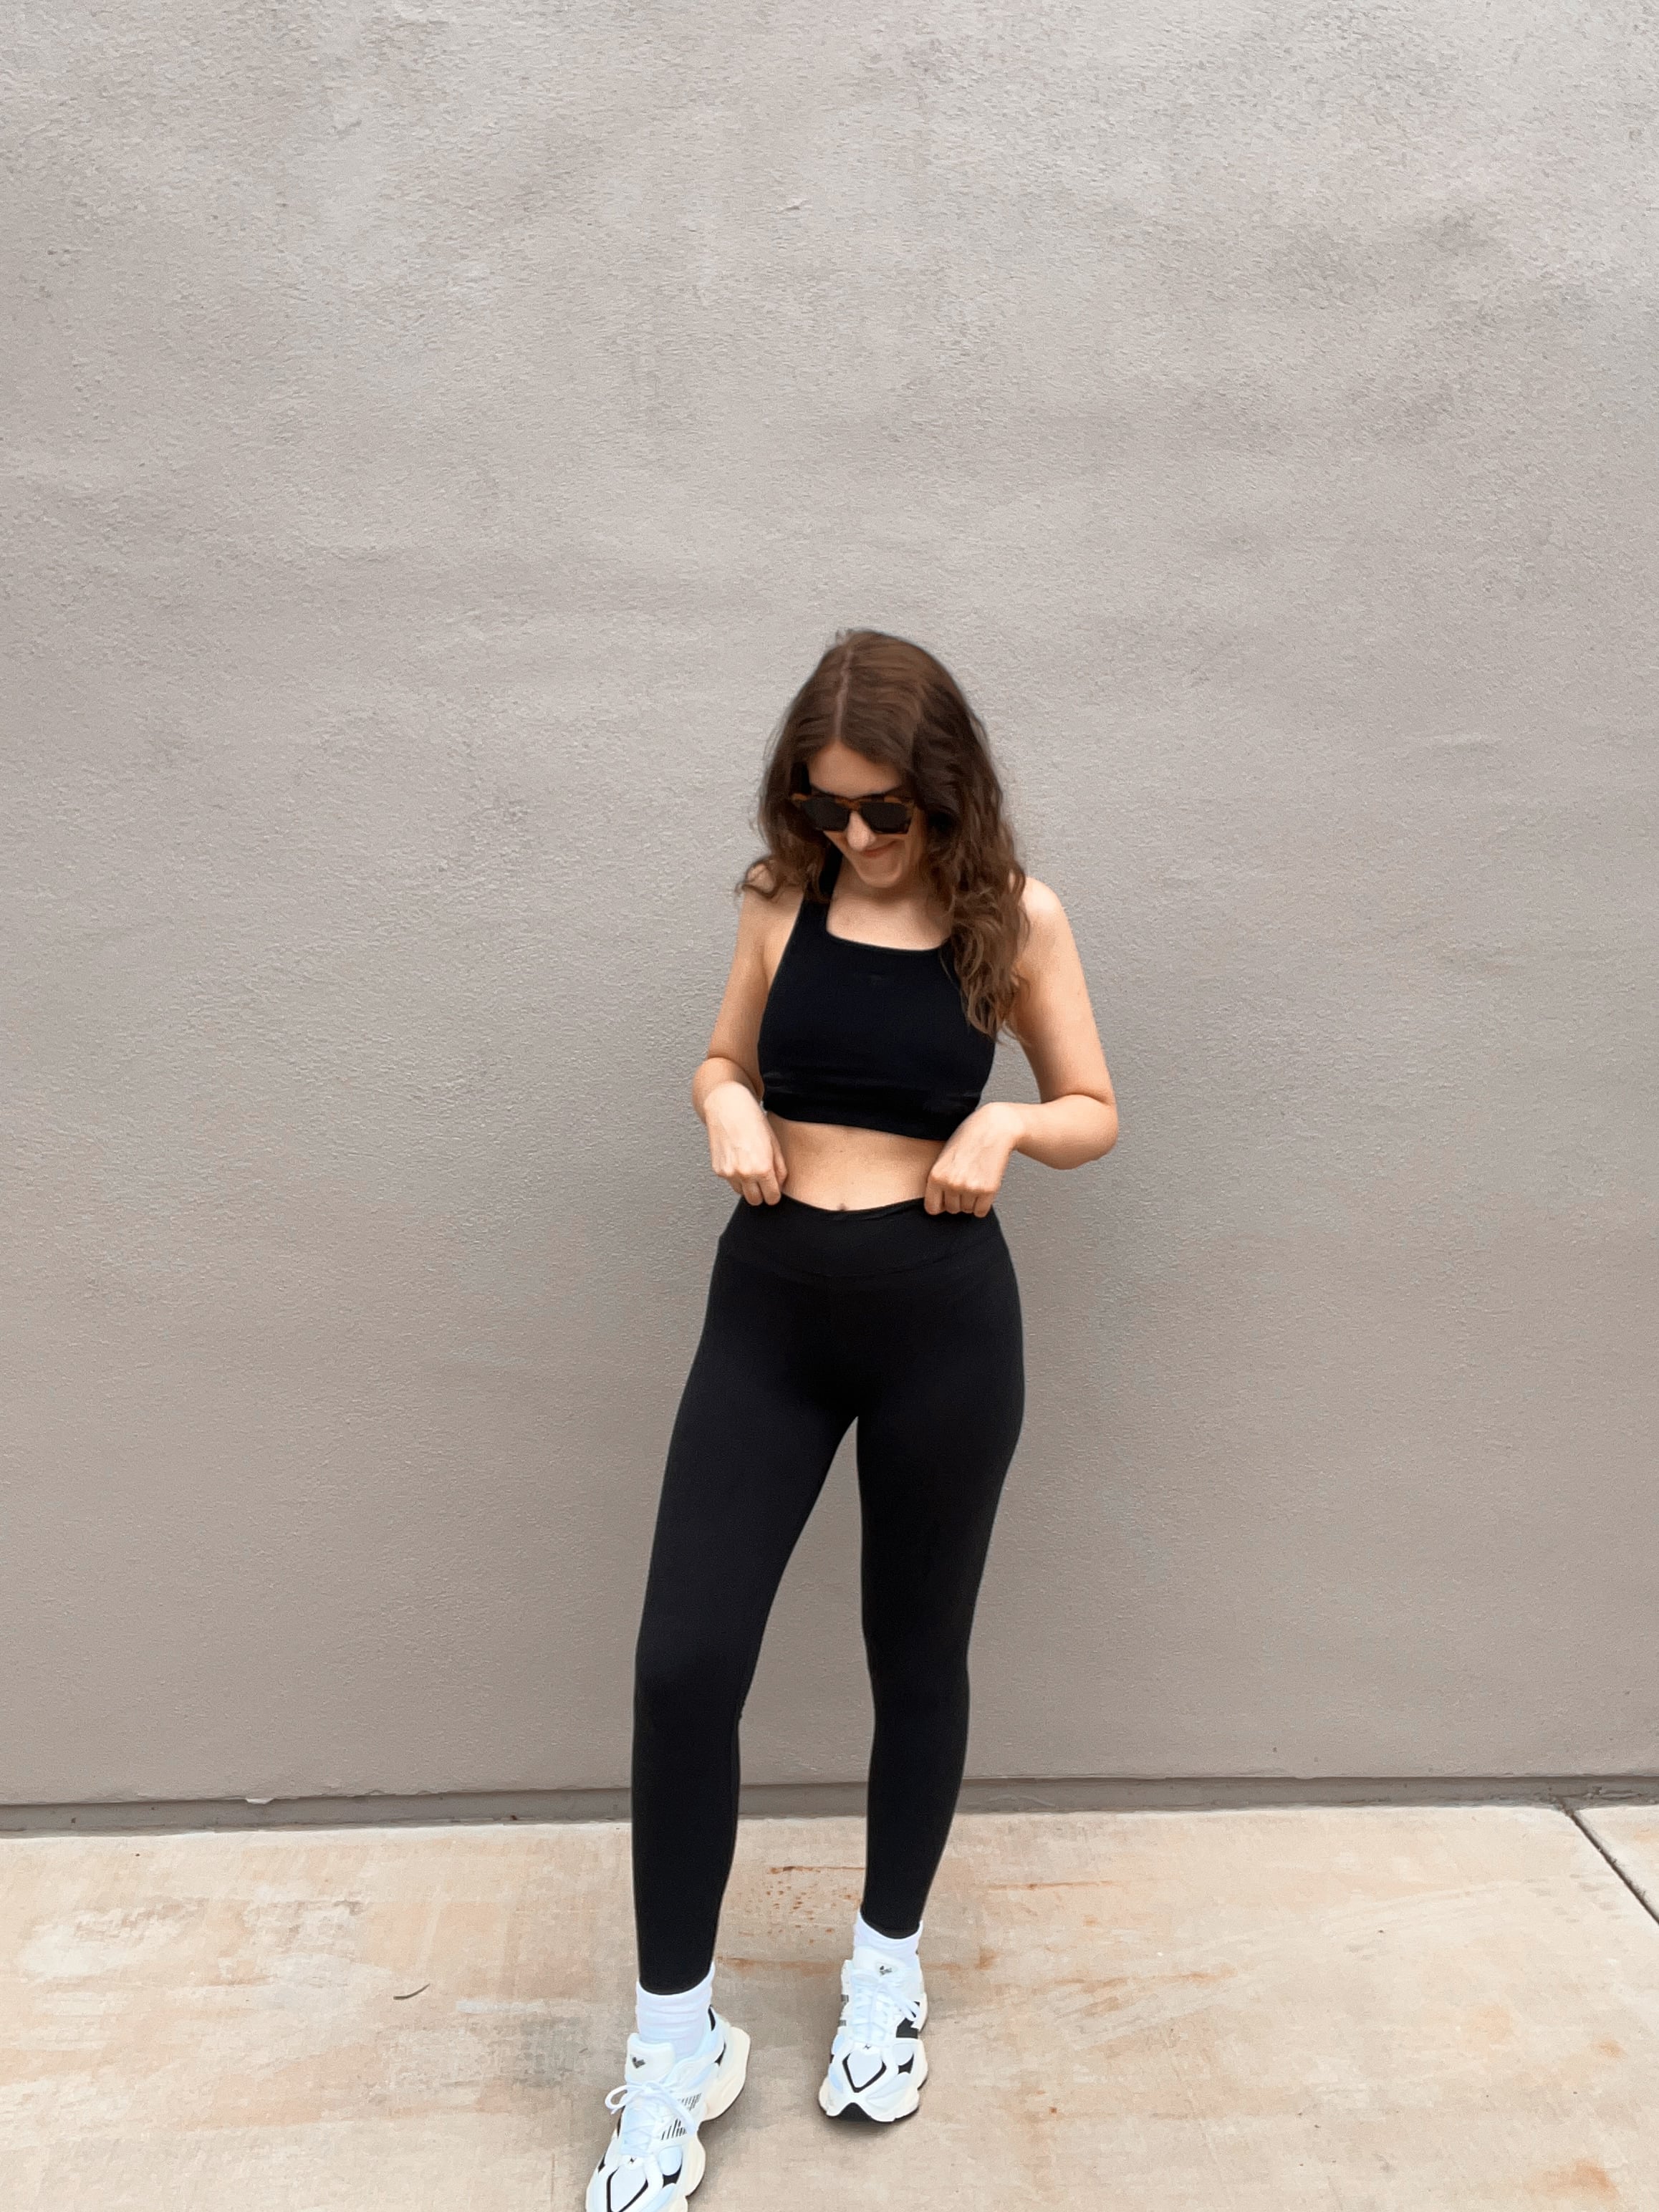 Shop best-selling $7 leggings with 1,000+ reviews